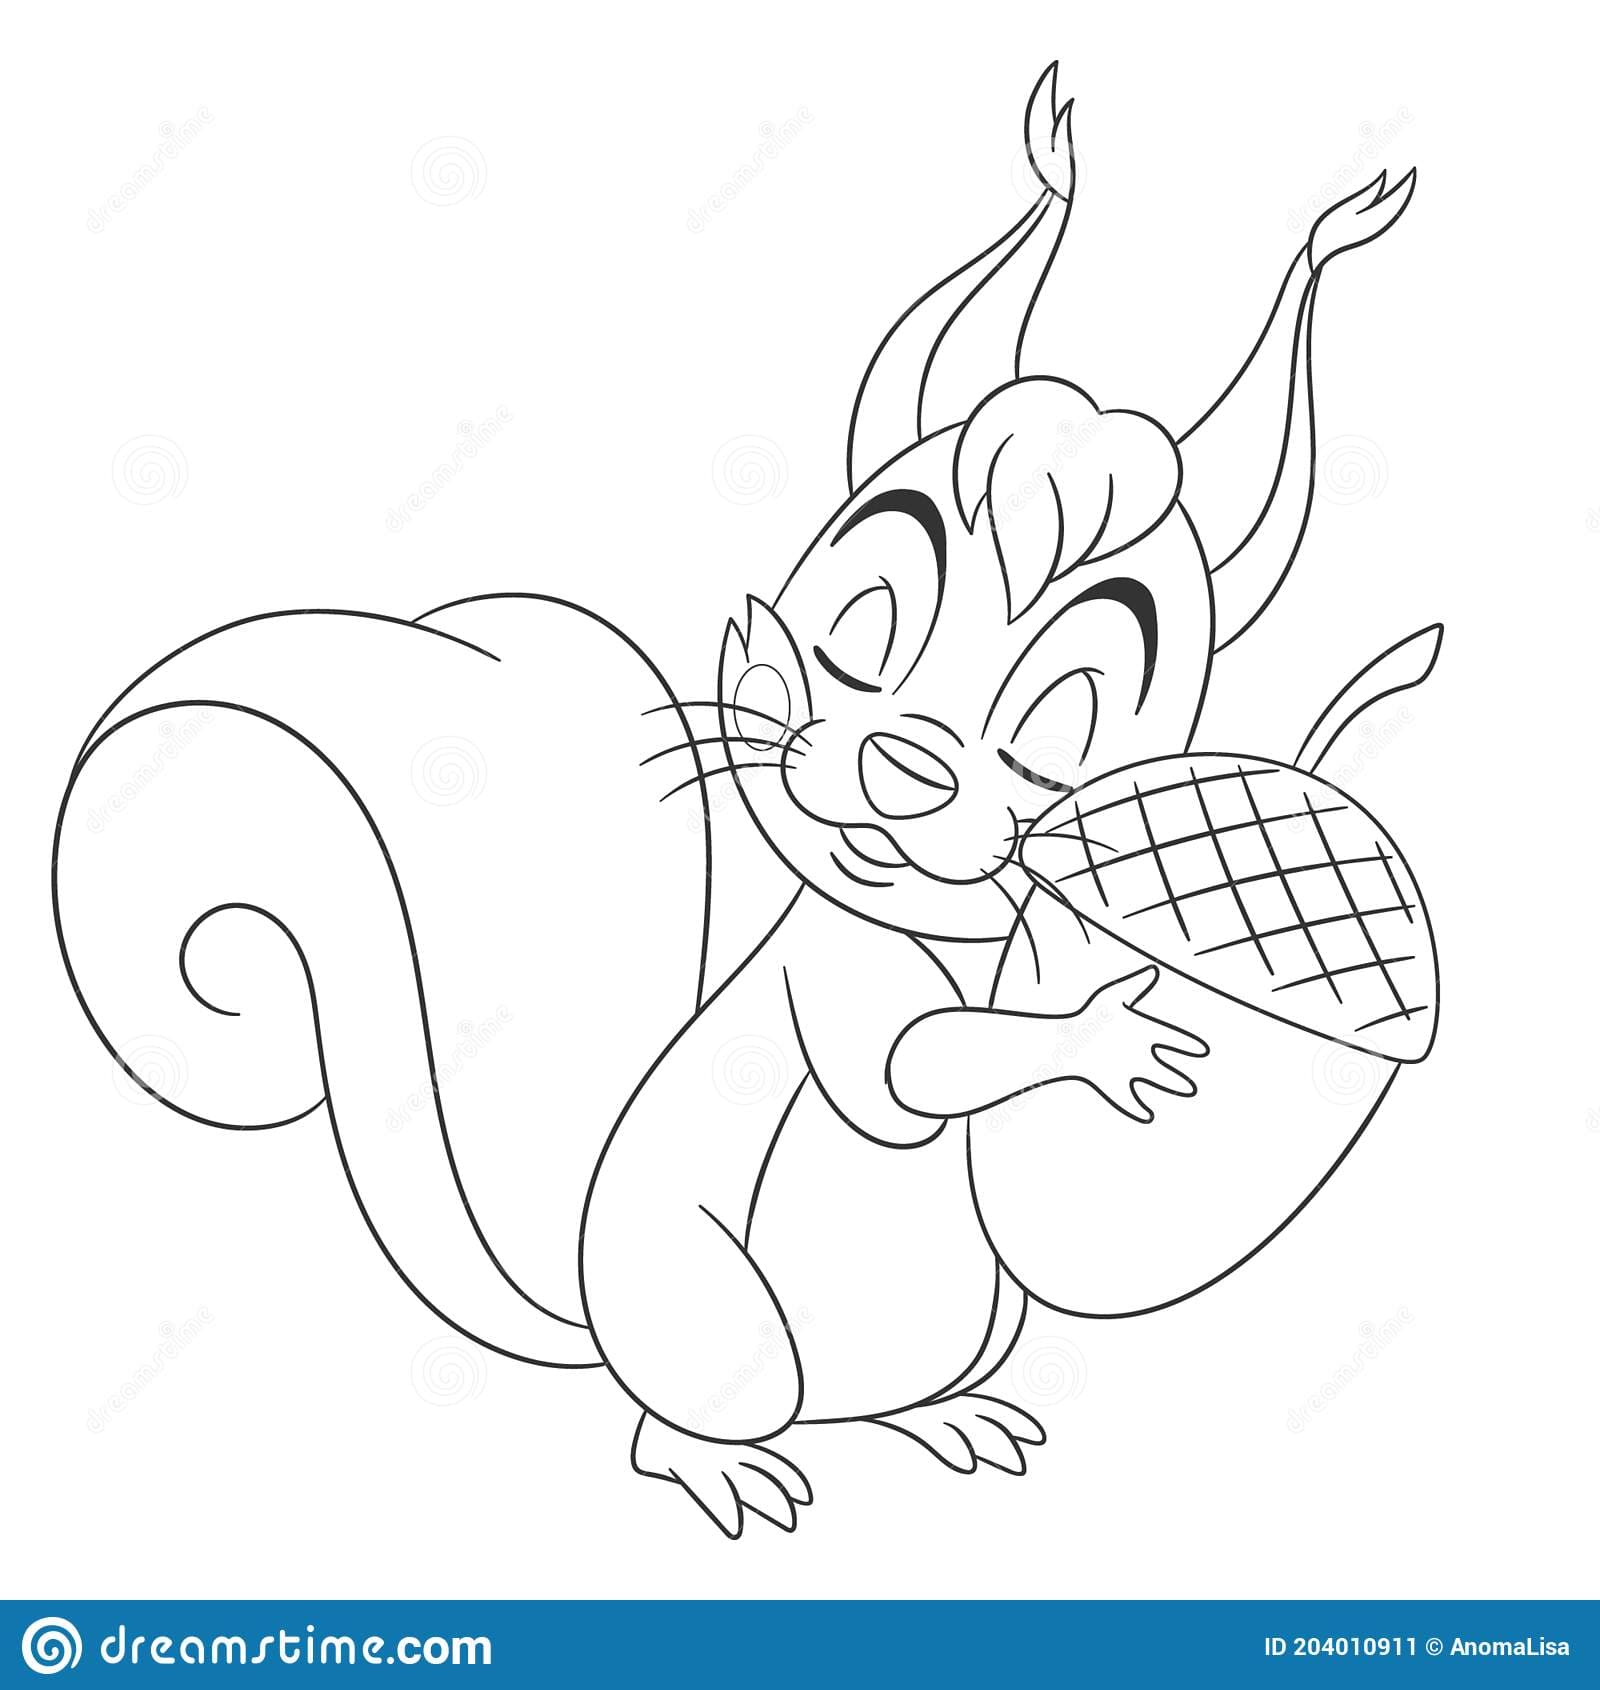 Coloring Page With Squirrel And Acorn